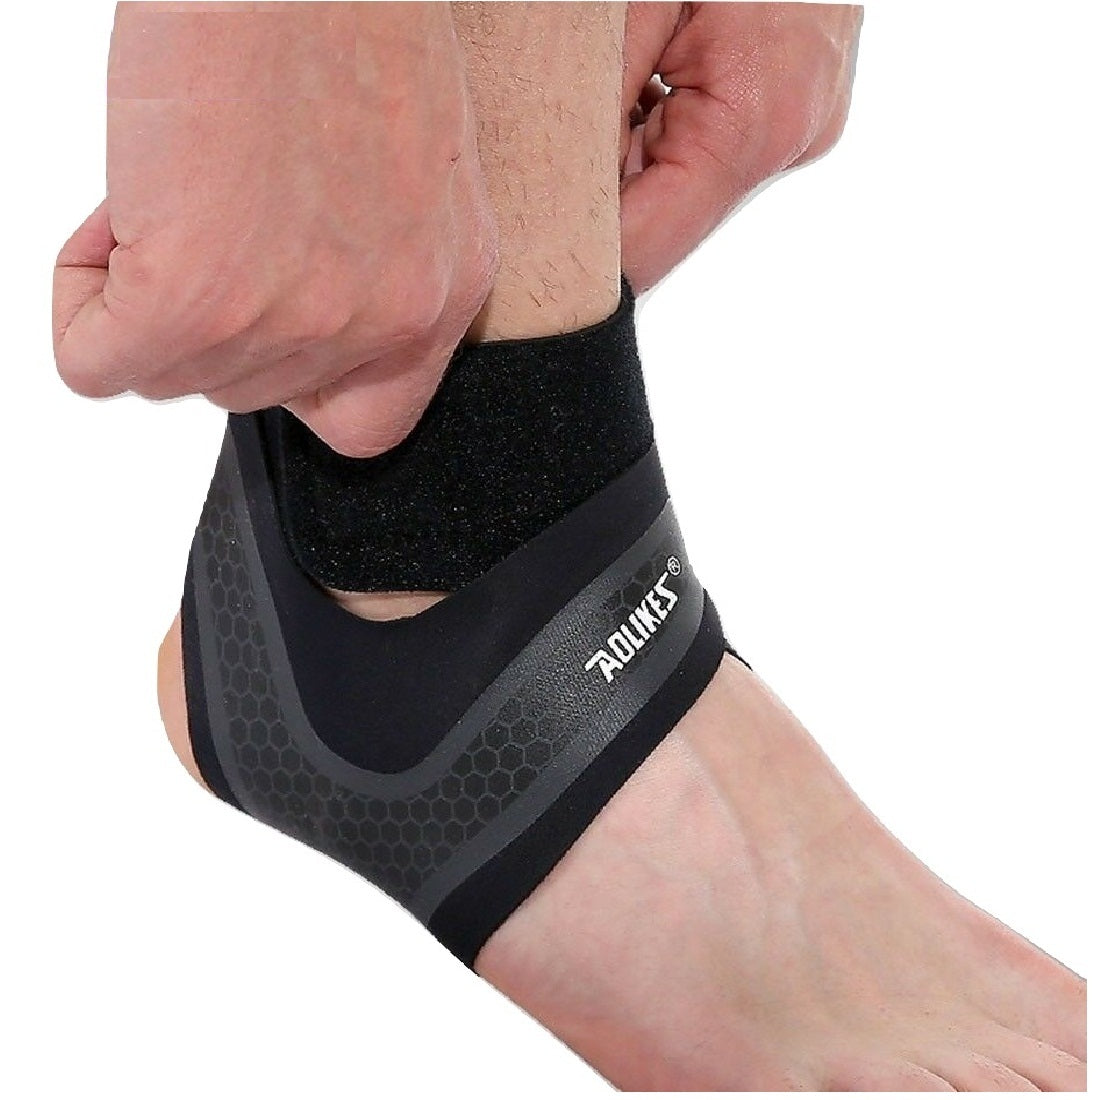 Sozzumi Ankle Support for Pain Relief and brace Sleeve, Bandage Wrap For Foot Compression Brace Guard Compression Brace for Arthritis, Sprains